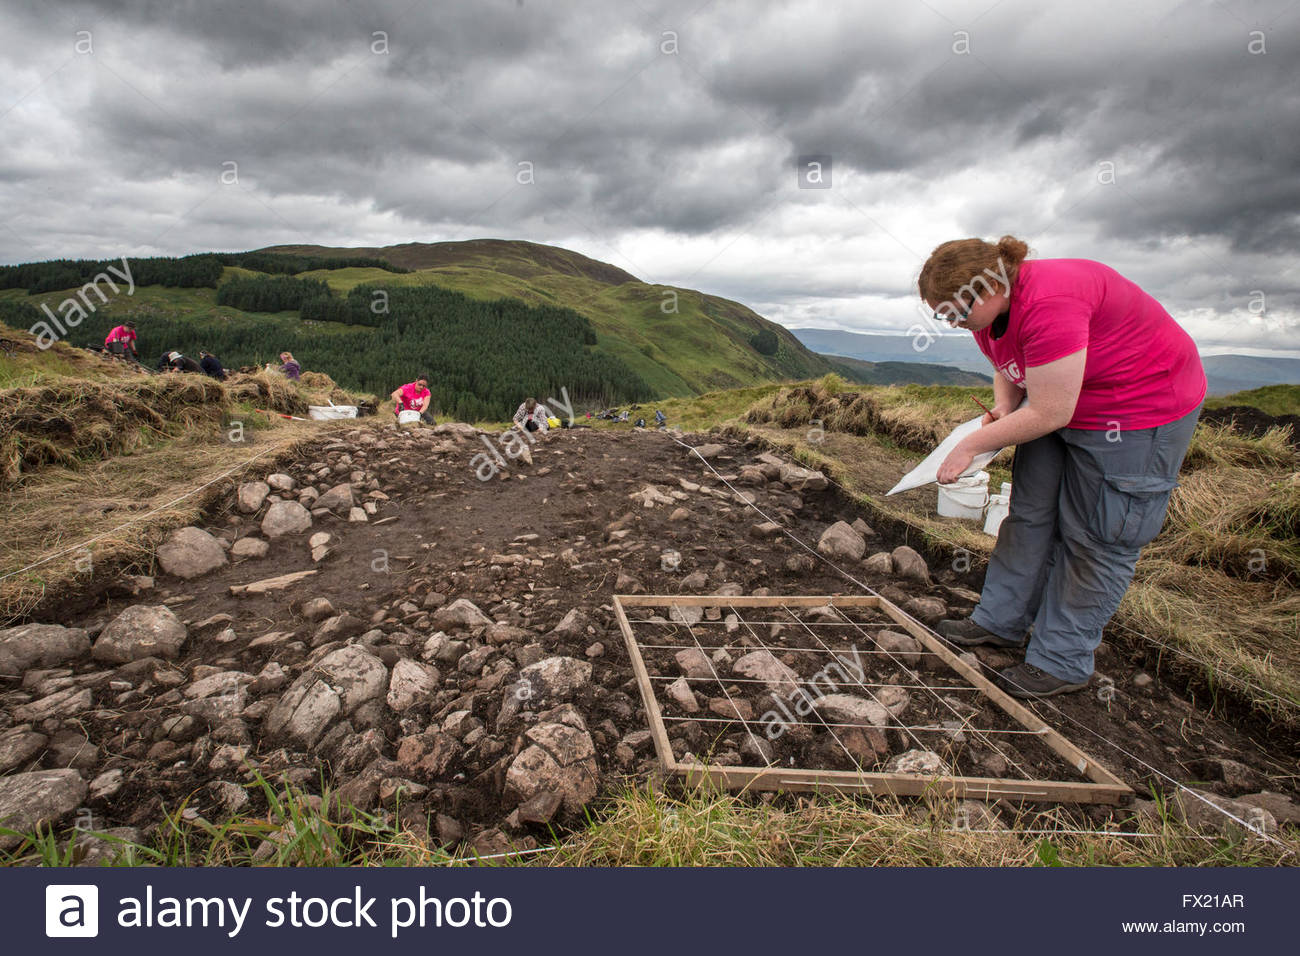 Archaeological Dig Stock Photos Image